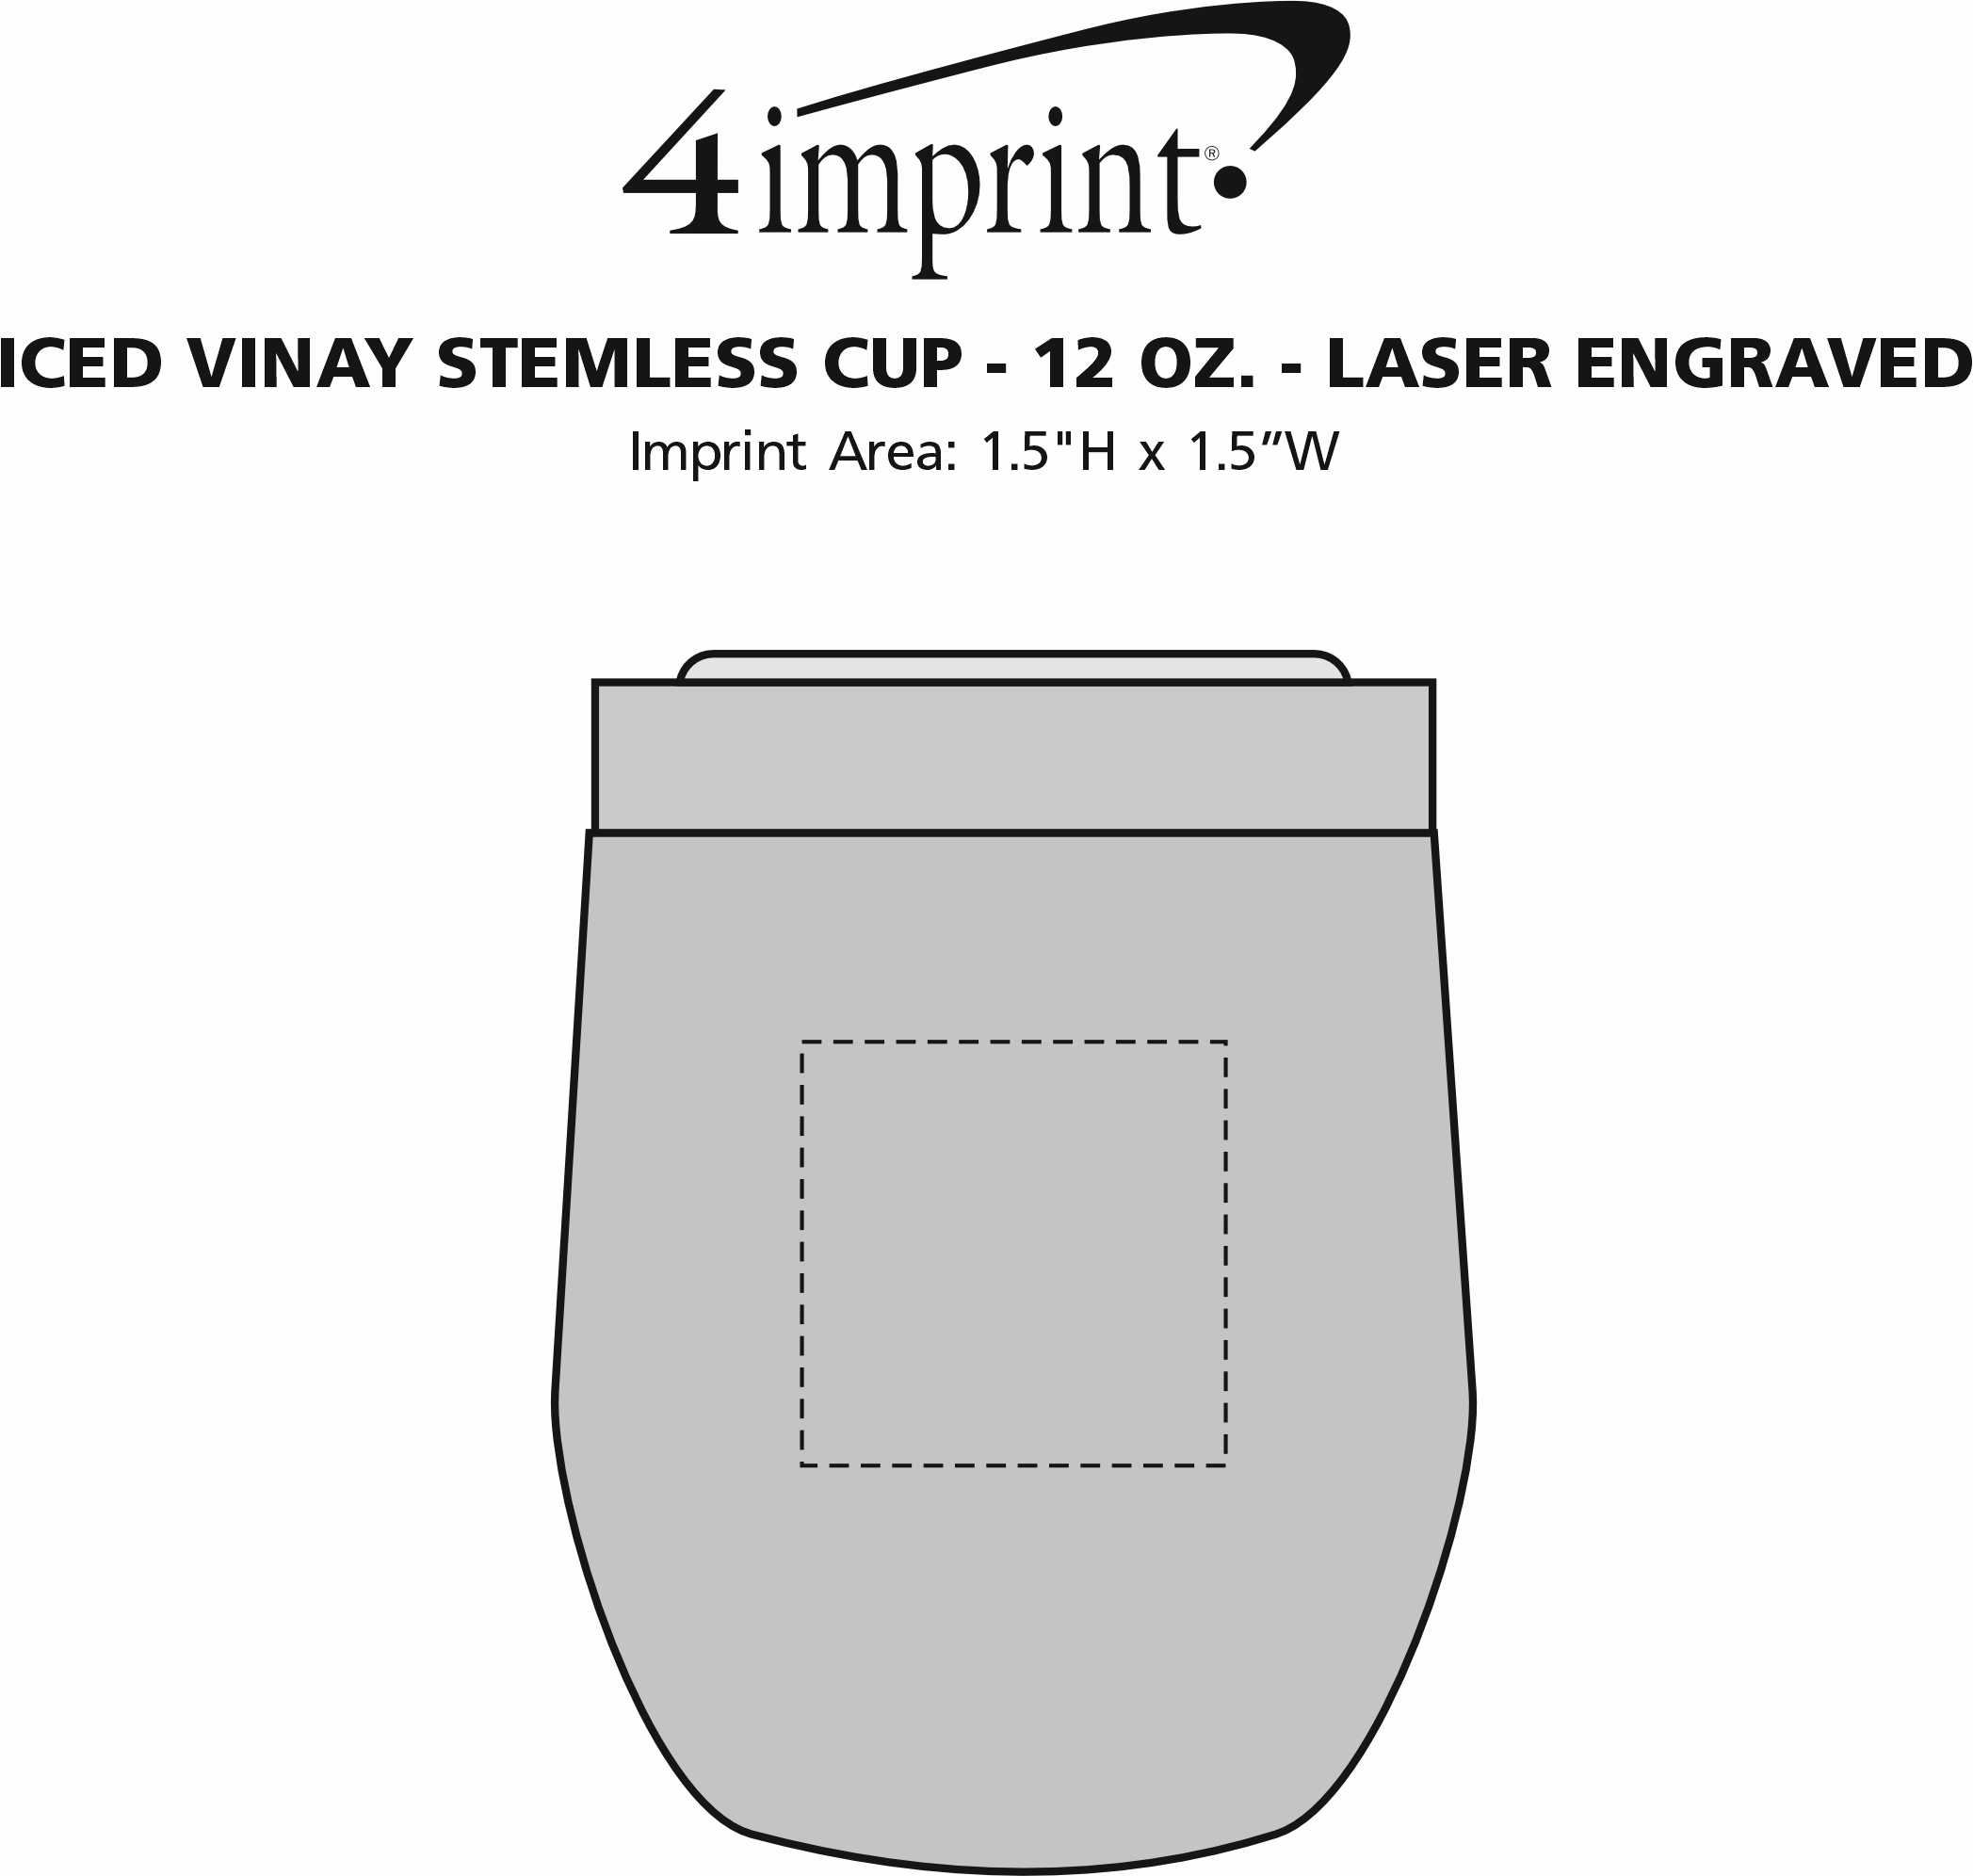 Imprint Area of Iced Vinay Stemless Cup - 12 oz. - Laser Engraved